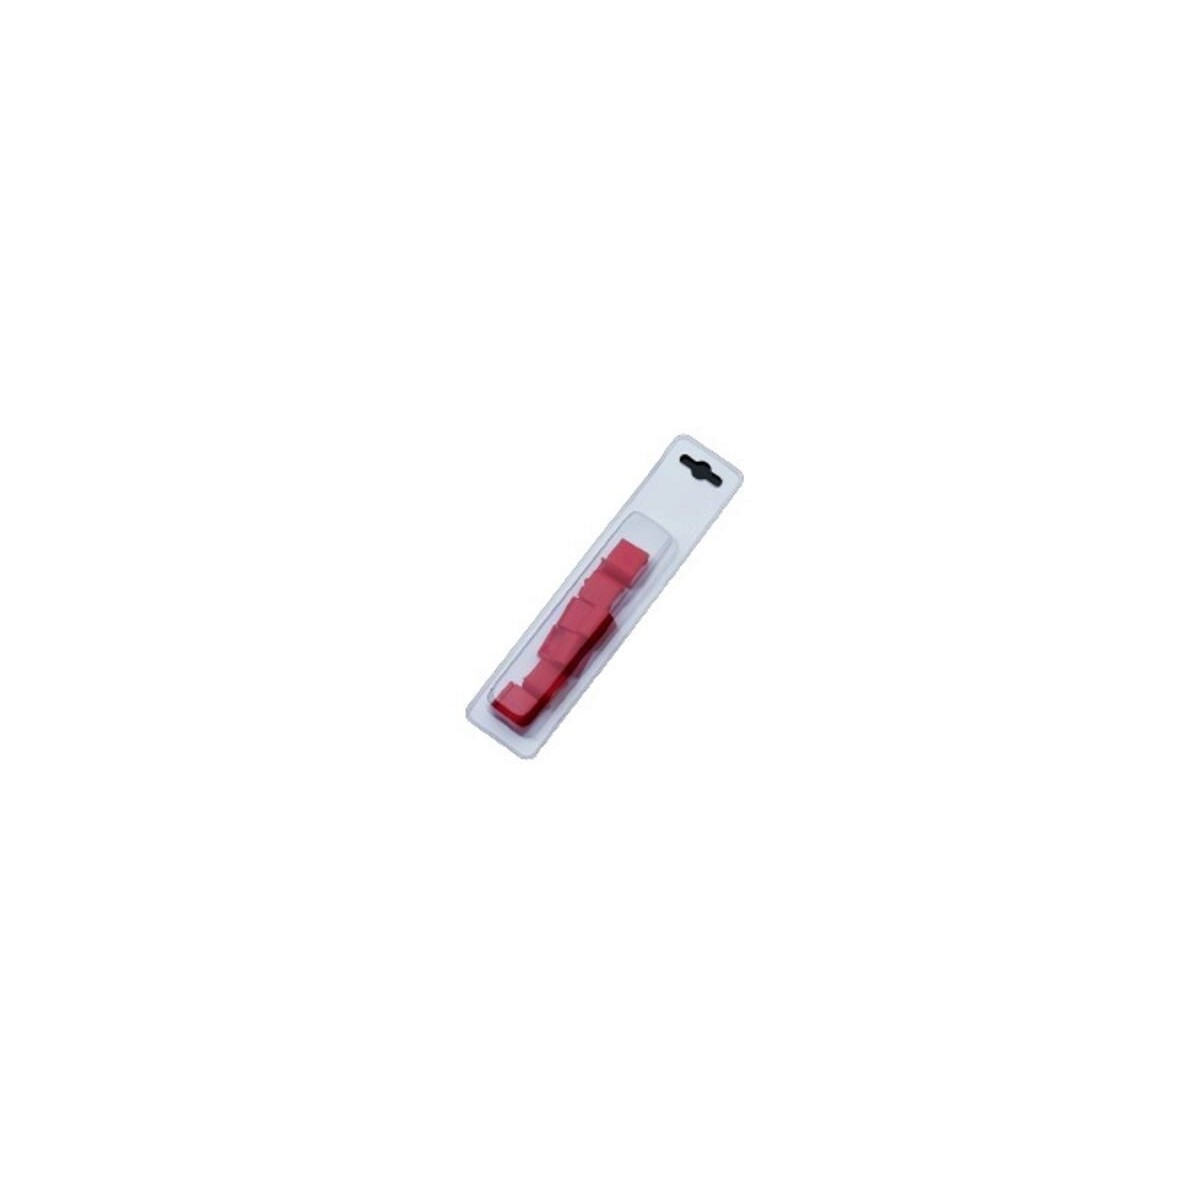 FDSBLISTER 12 CLIPS CODE COULEUR HACCP ROUGE